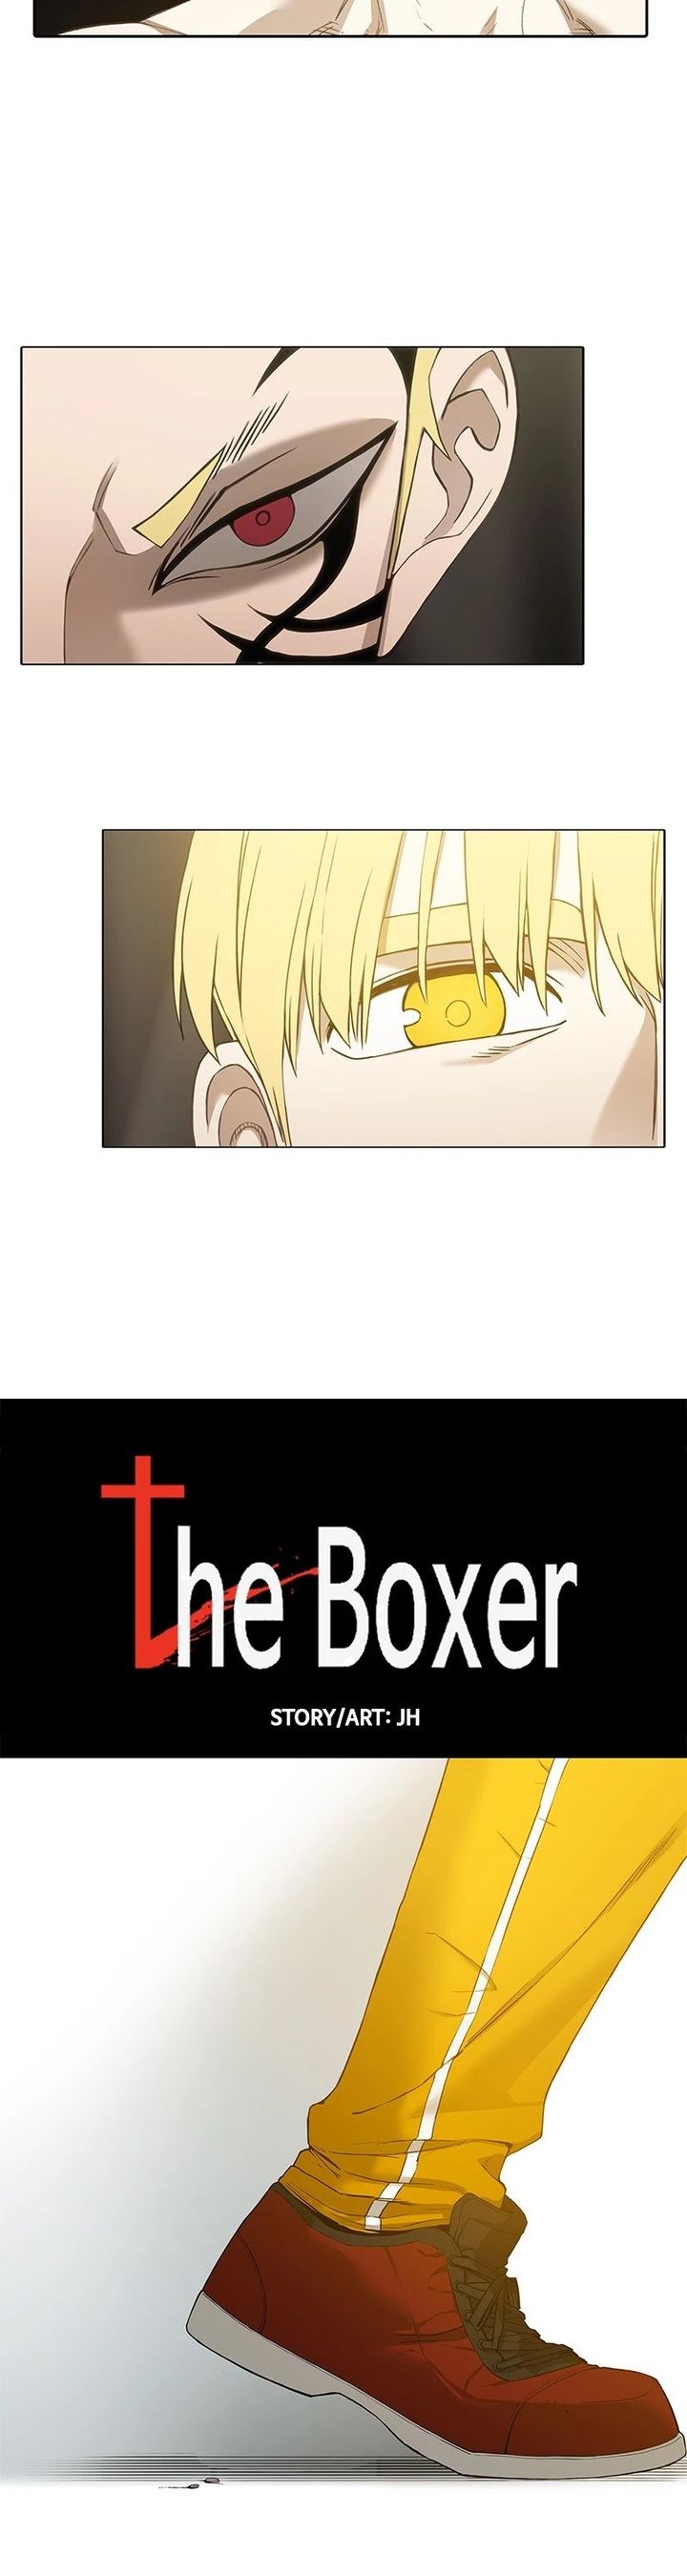 The Boxer 97 2